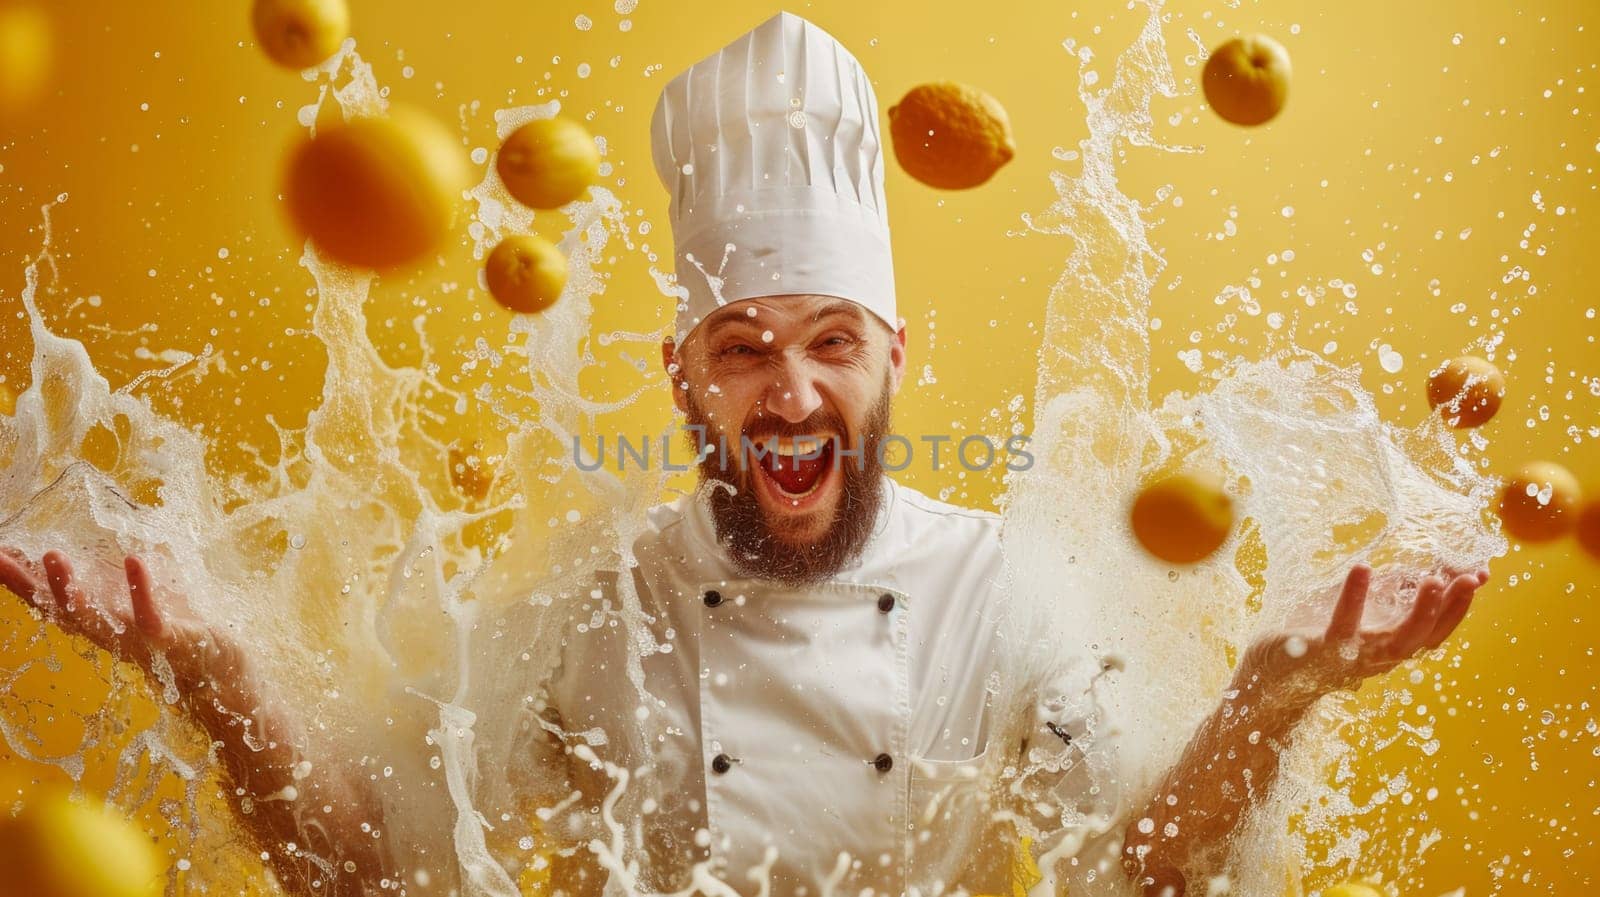 A chef in a white hat splashing water on his face, AI by starush